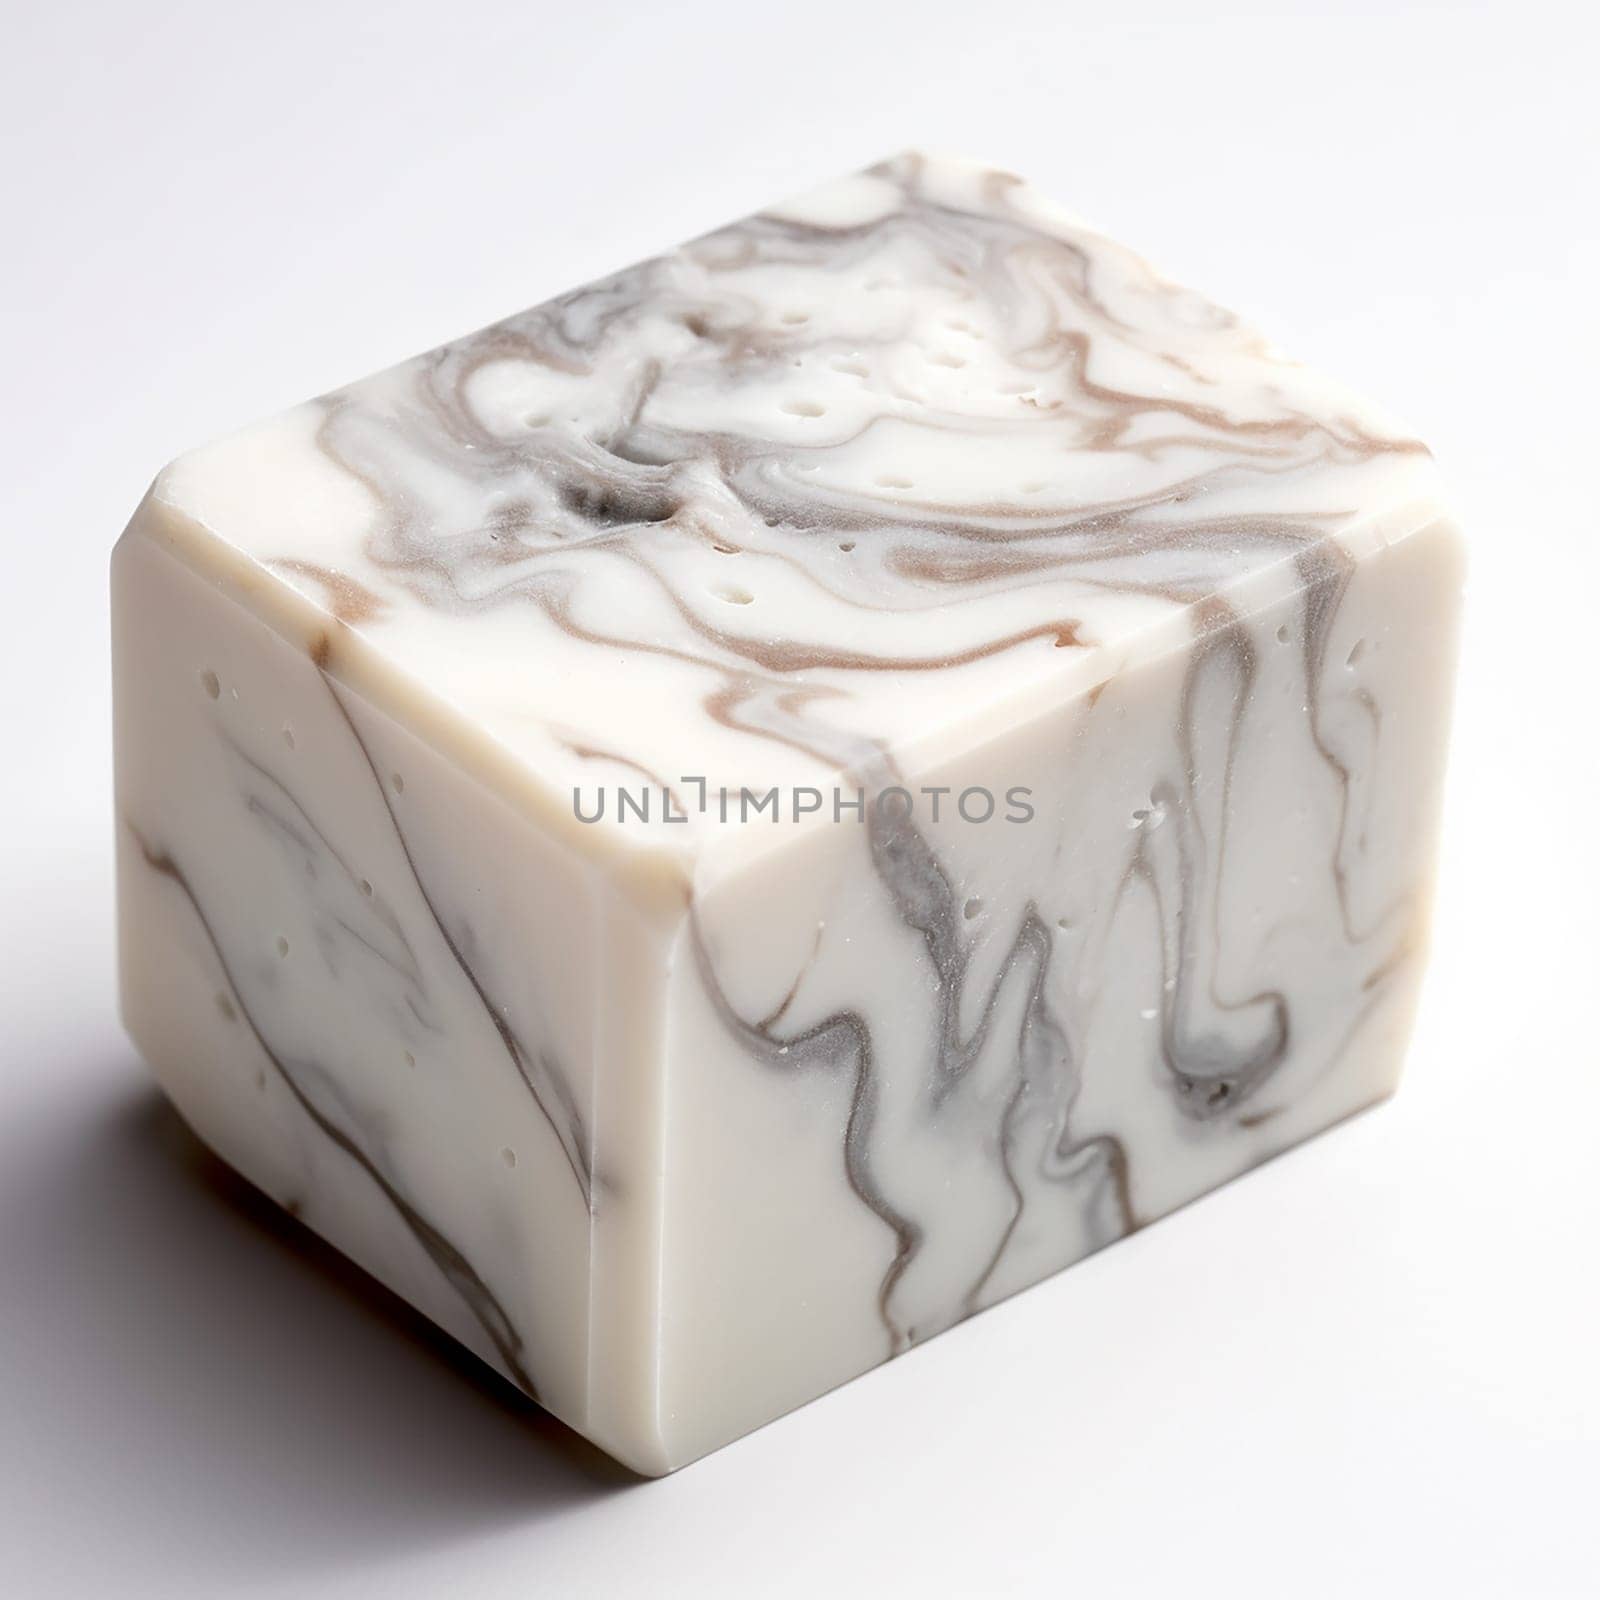 A piece of soap with a white and gray marble design.